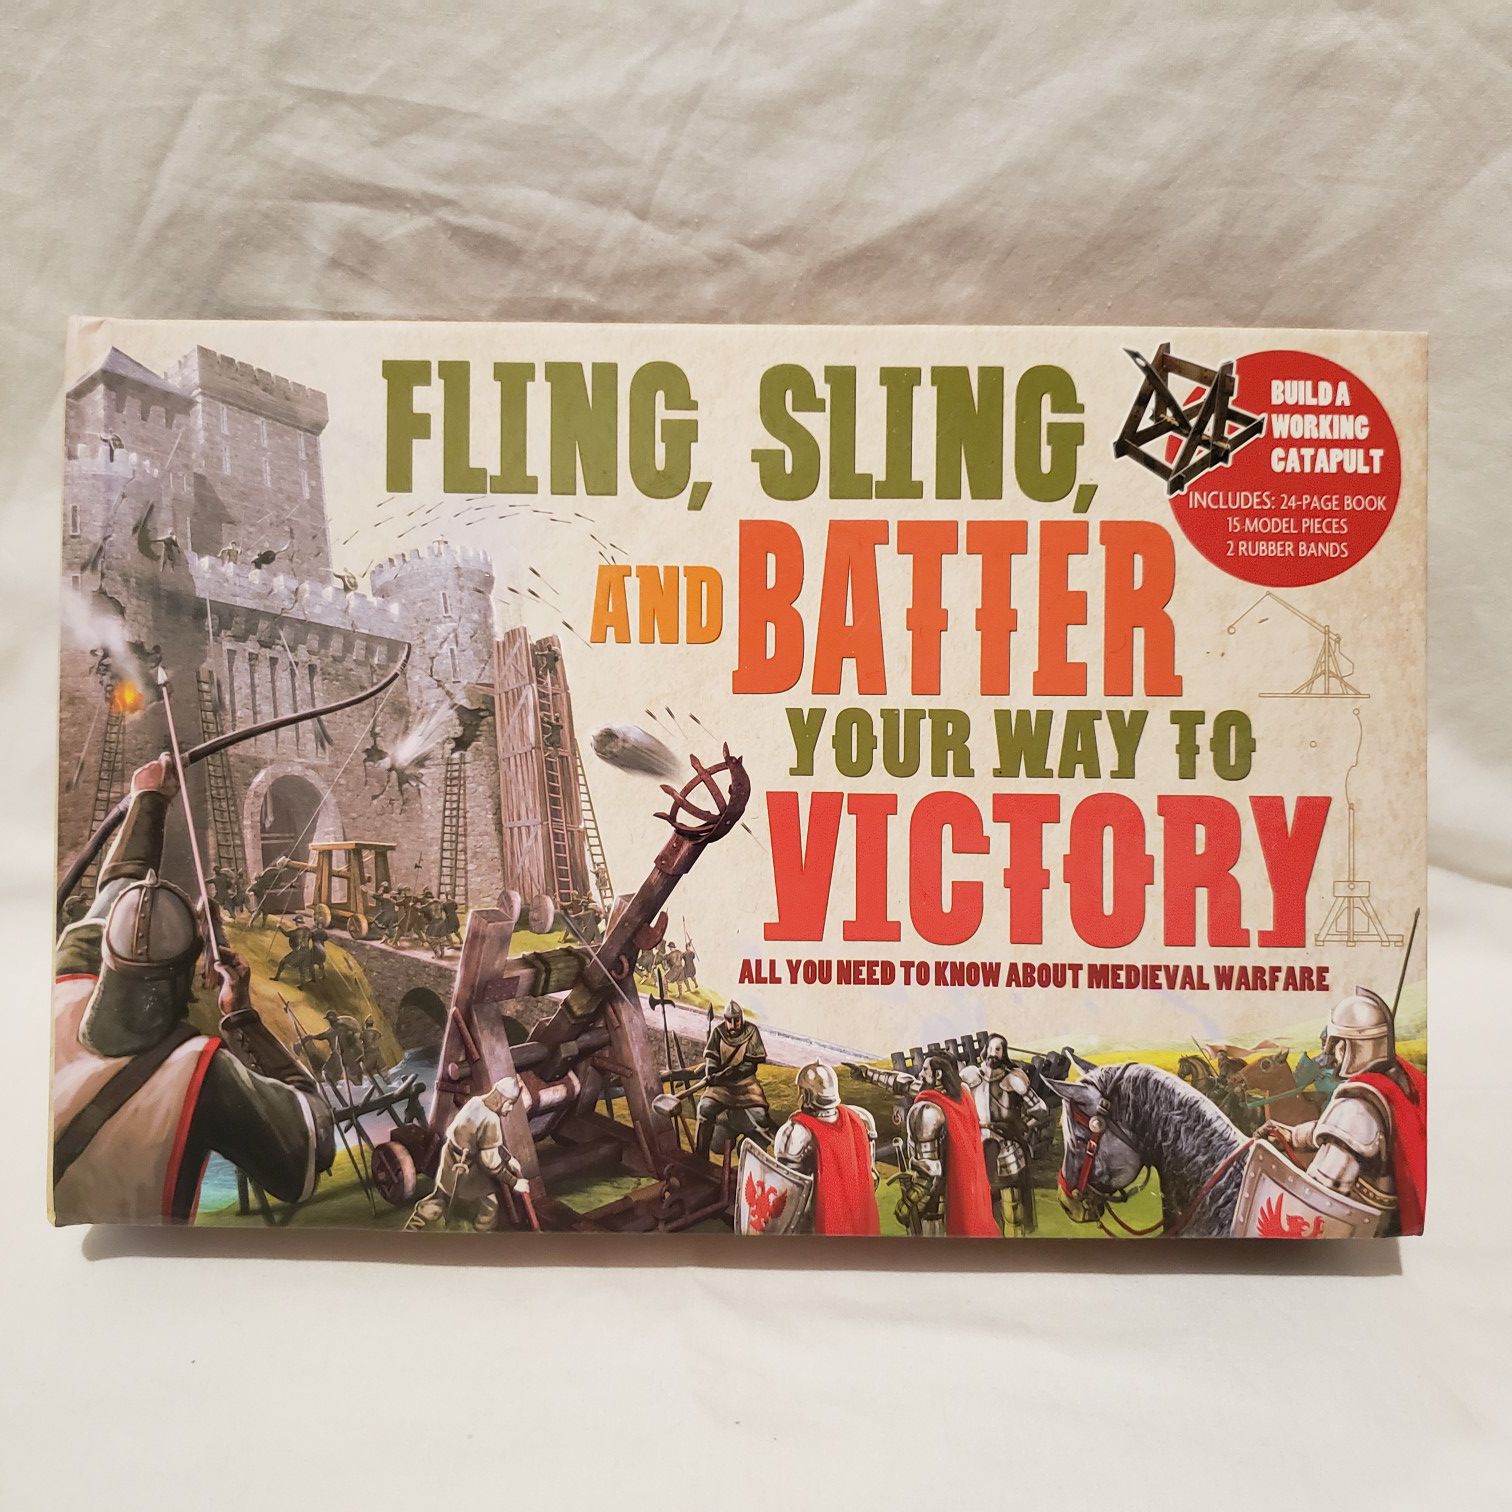 "Fling, Sling, and Batter Your Way to Victory"